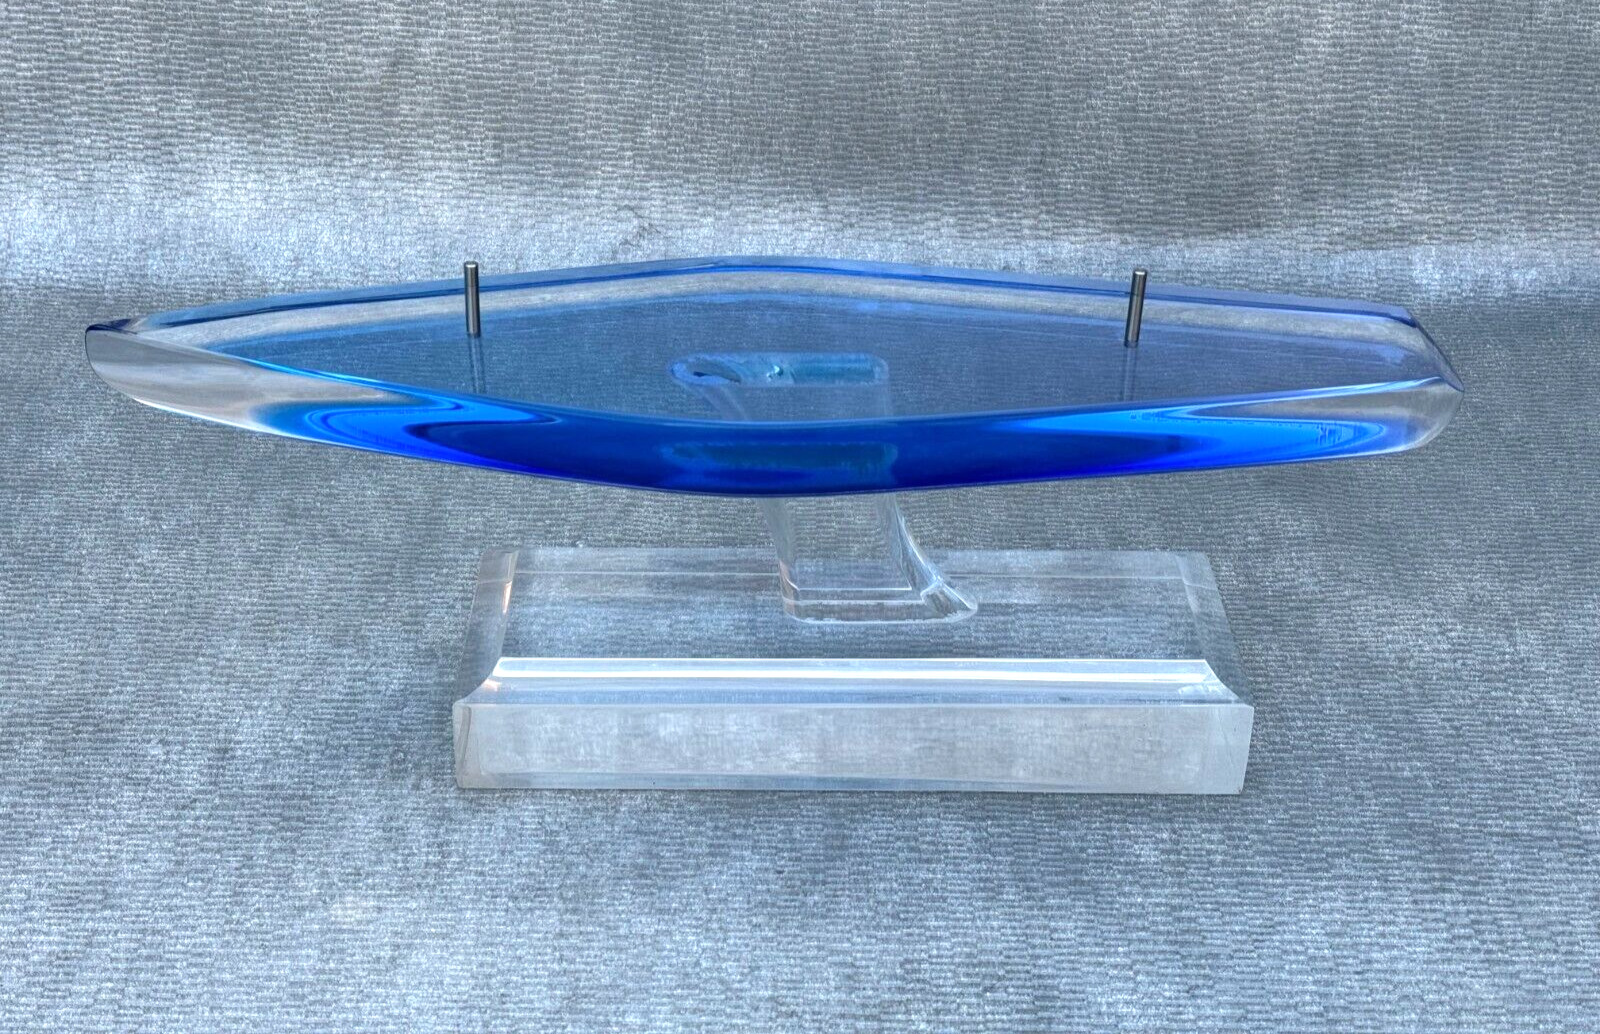 J PENRI 1998 SIGNED CLEAR LUCITE ACRYLIC BOAT YACHT BODY & STAND NO SAILS 18.5\